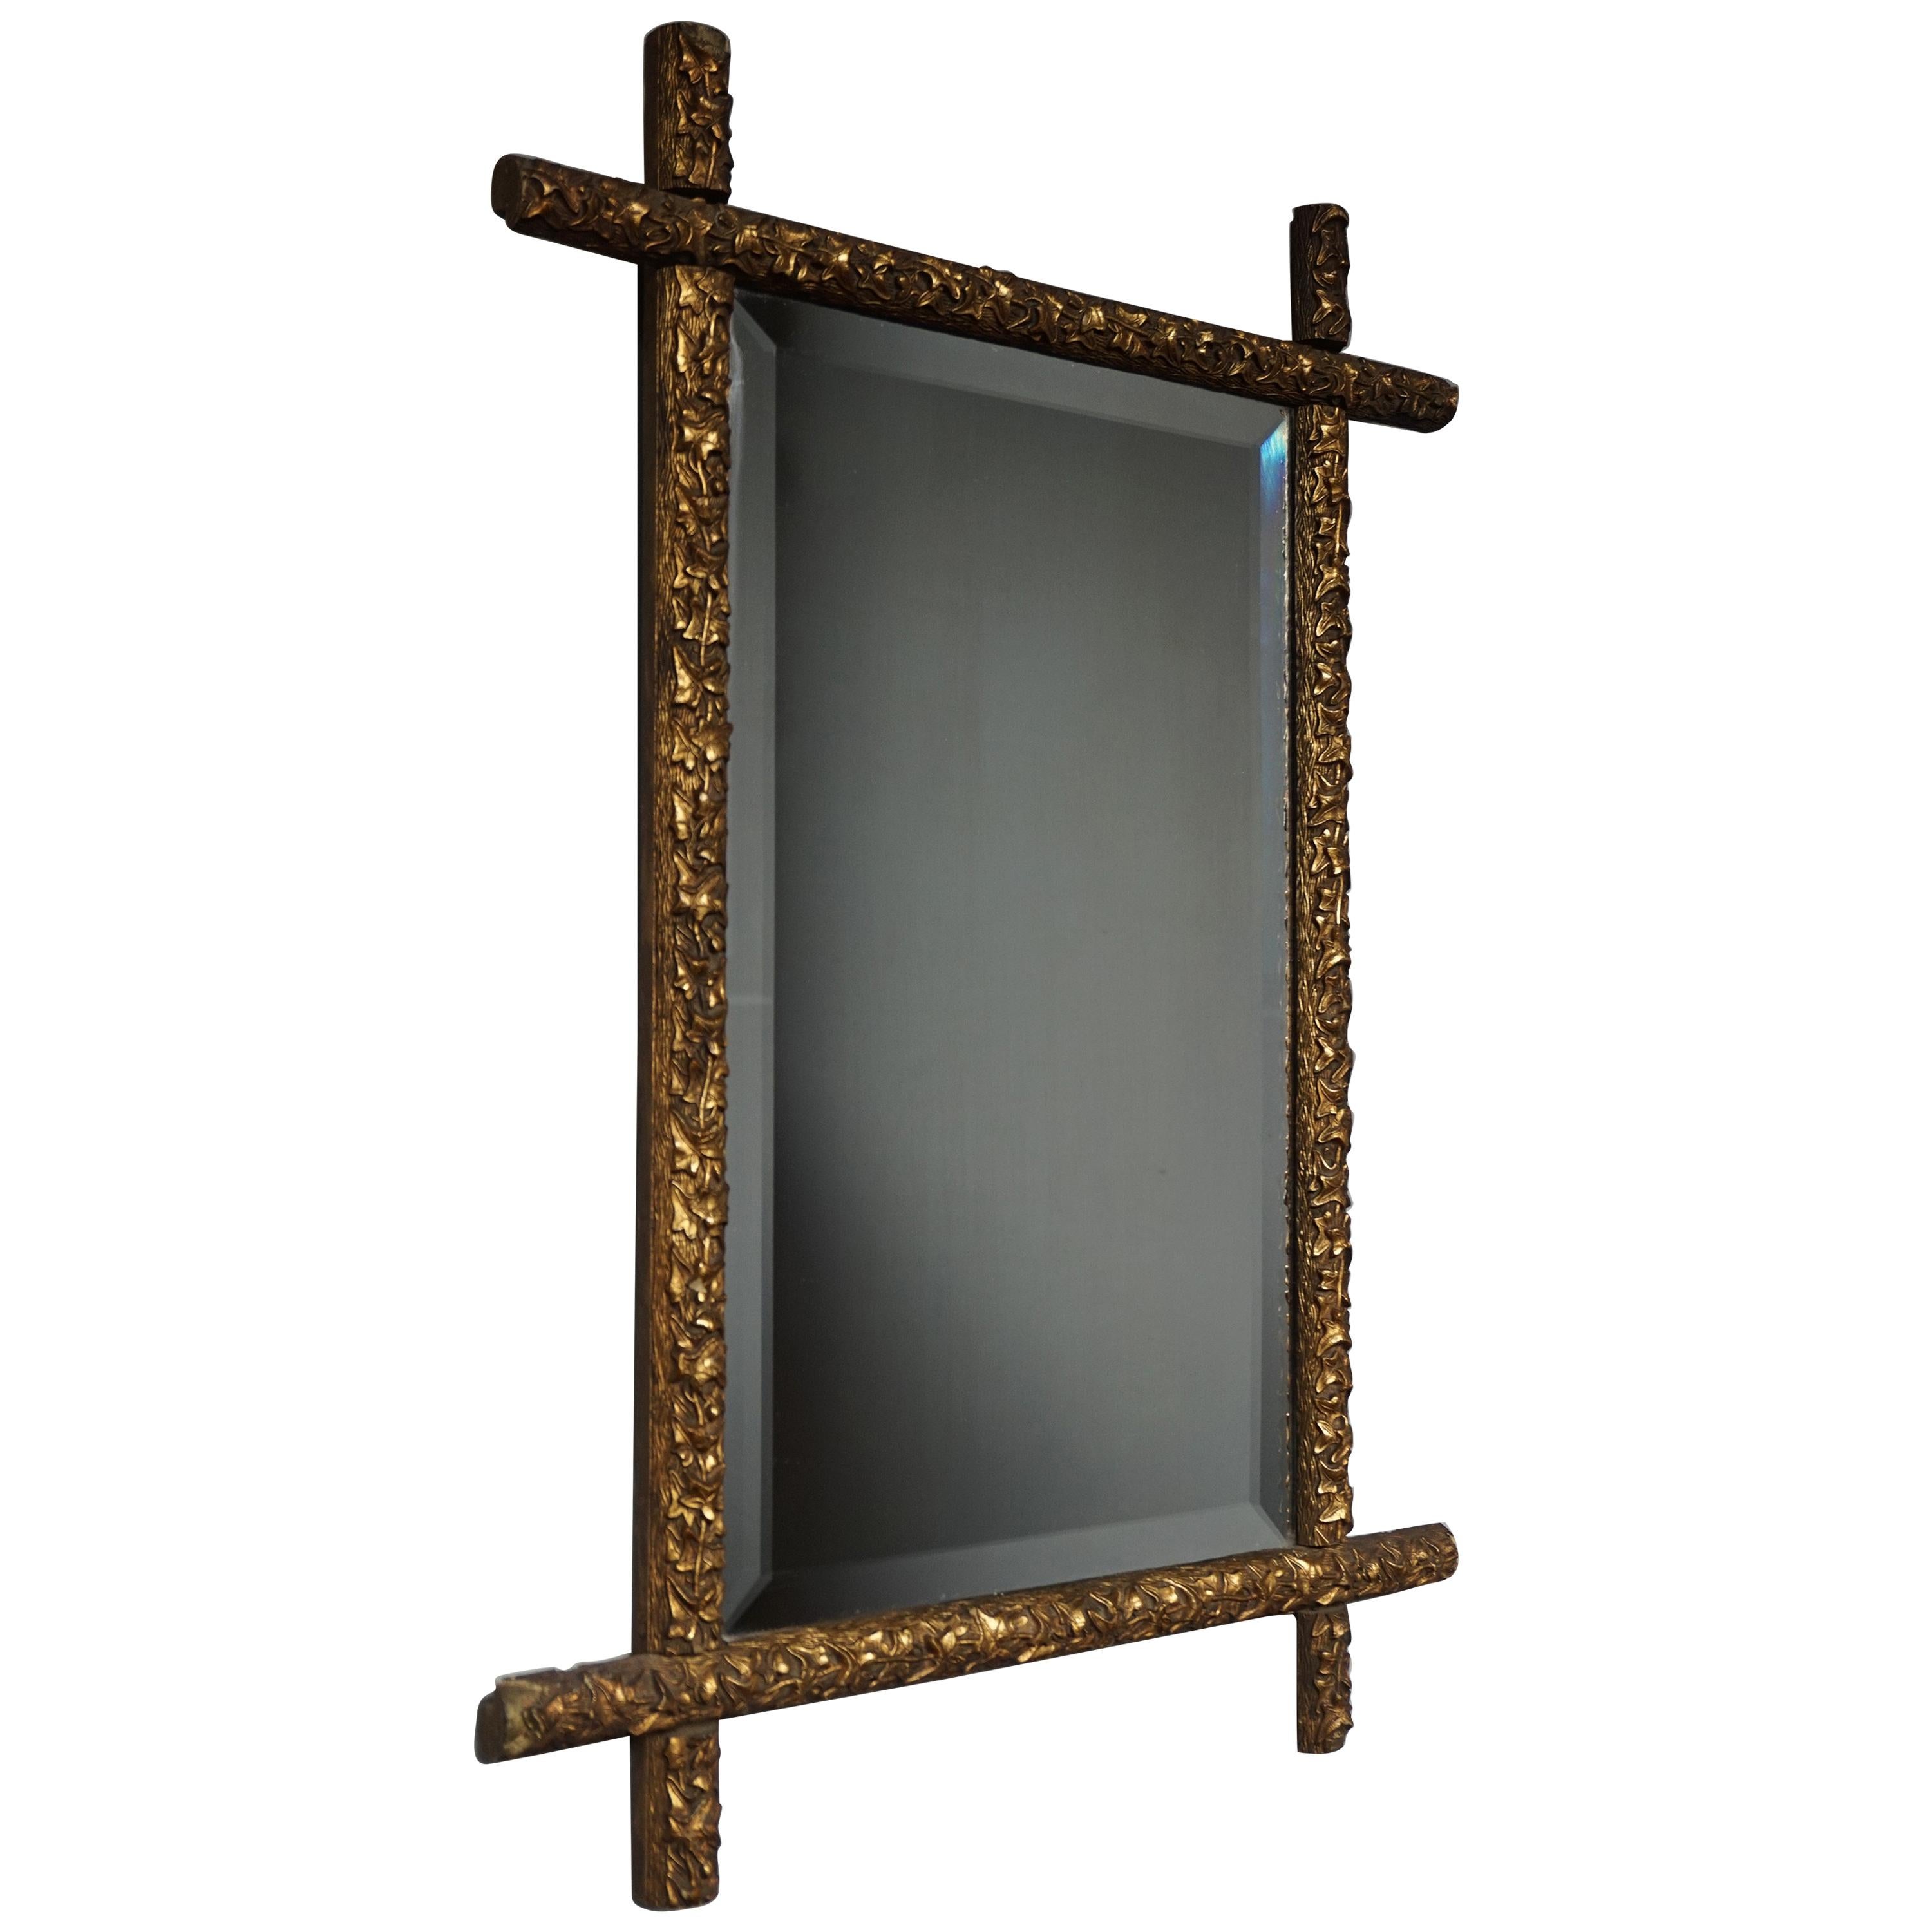 Antique Handcrafted Gothic Revival Gilt Leafs on Wooden Frame 1880s Cross Mirror For Sale